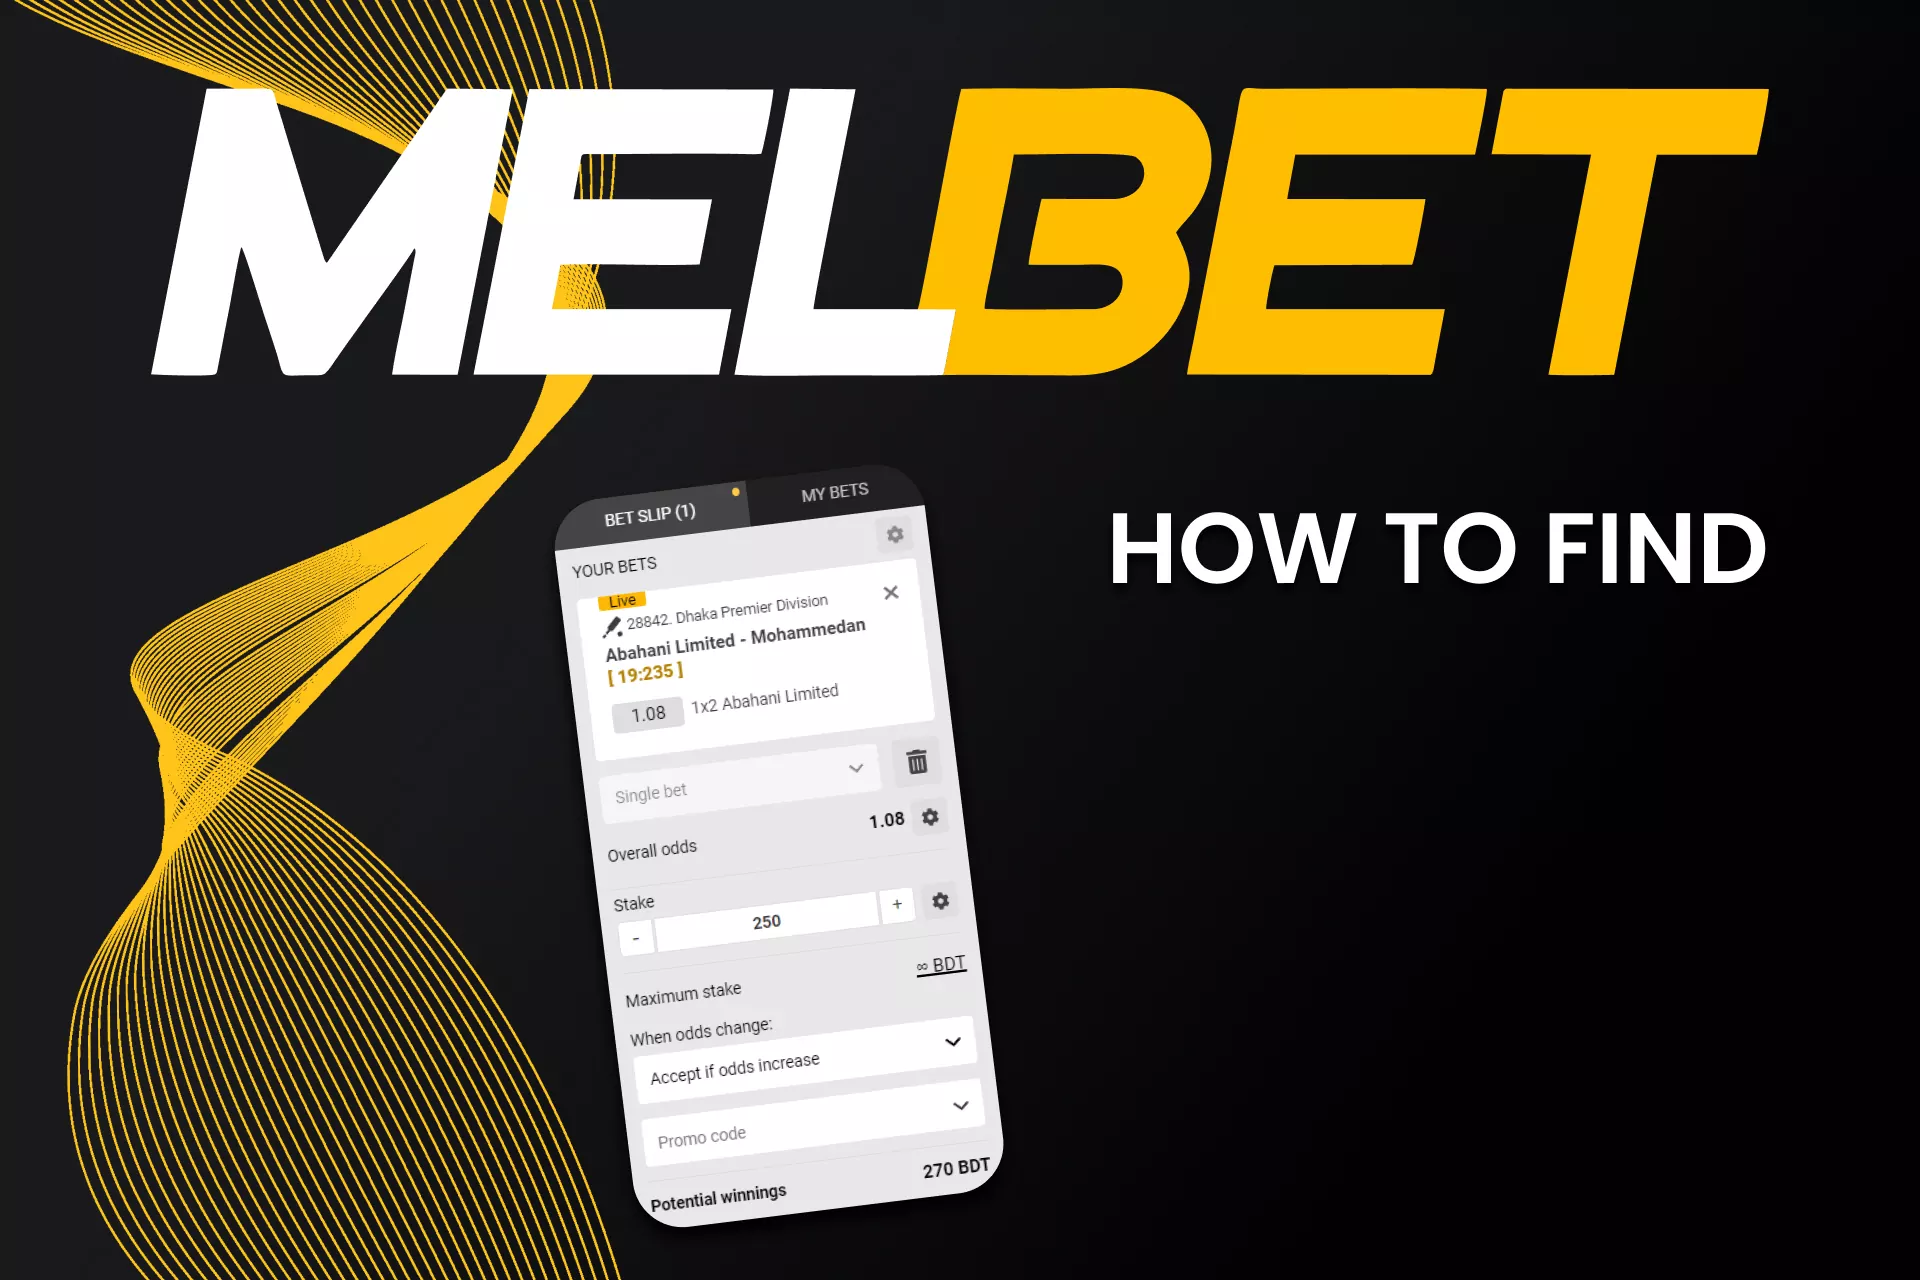 Find the betting code from Melbet.